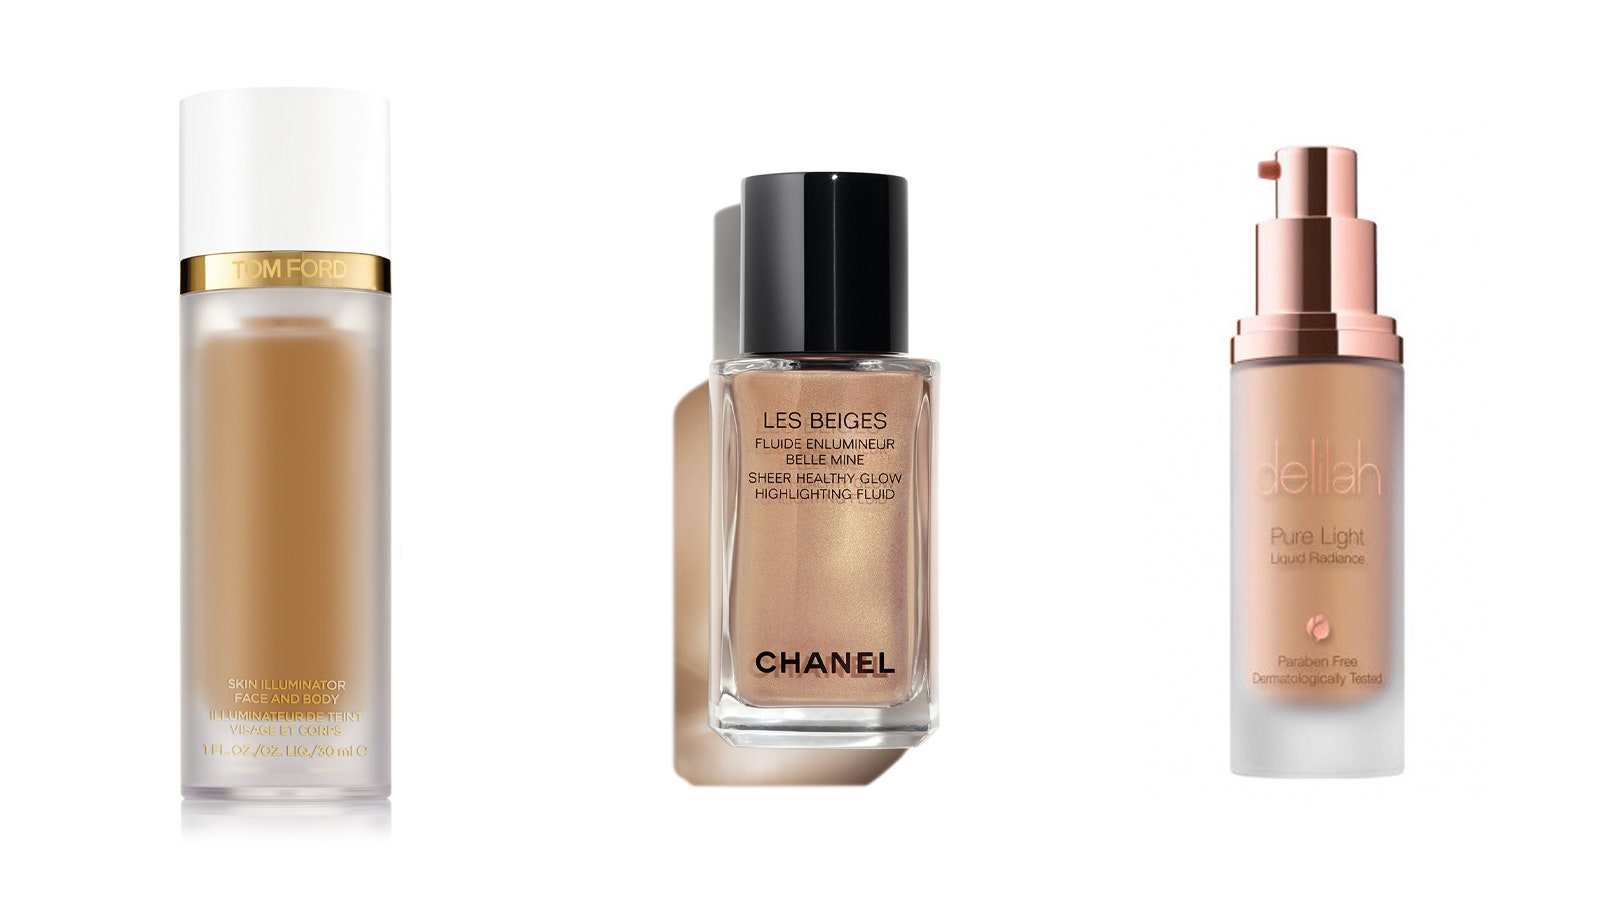 Tom Ford Face and Body Skin Illuminator Chanel Les Beiges Sheer Healthy Glow Highlighting Fluid delilah Pure Light...